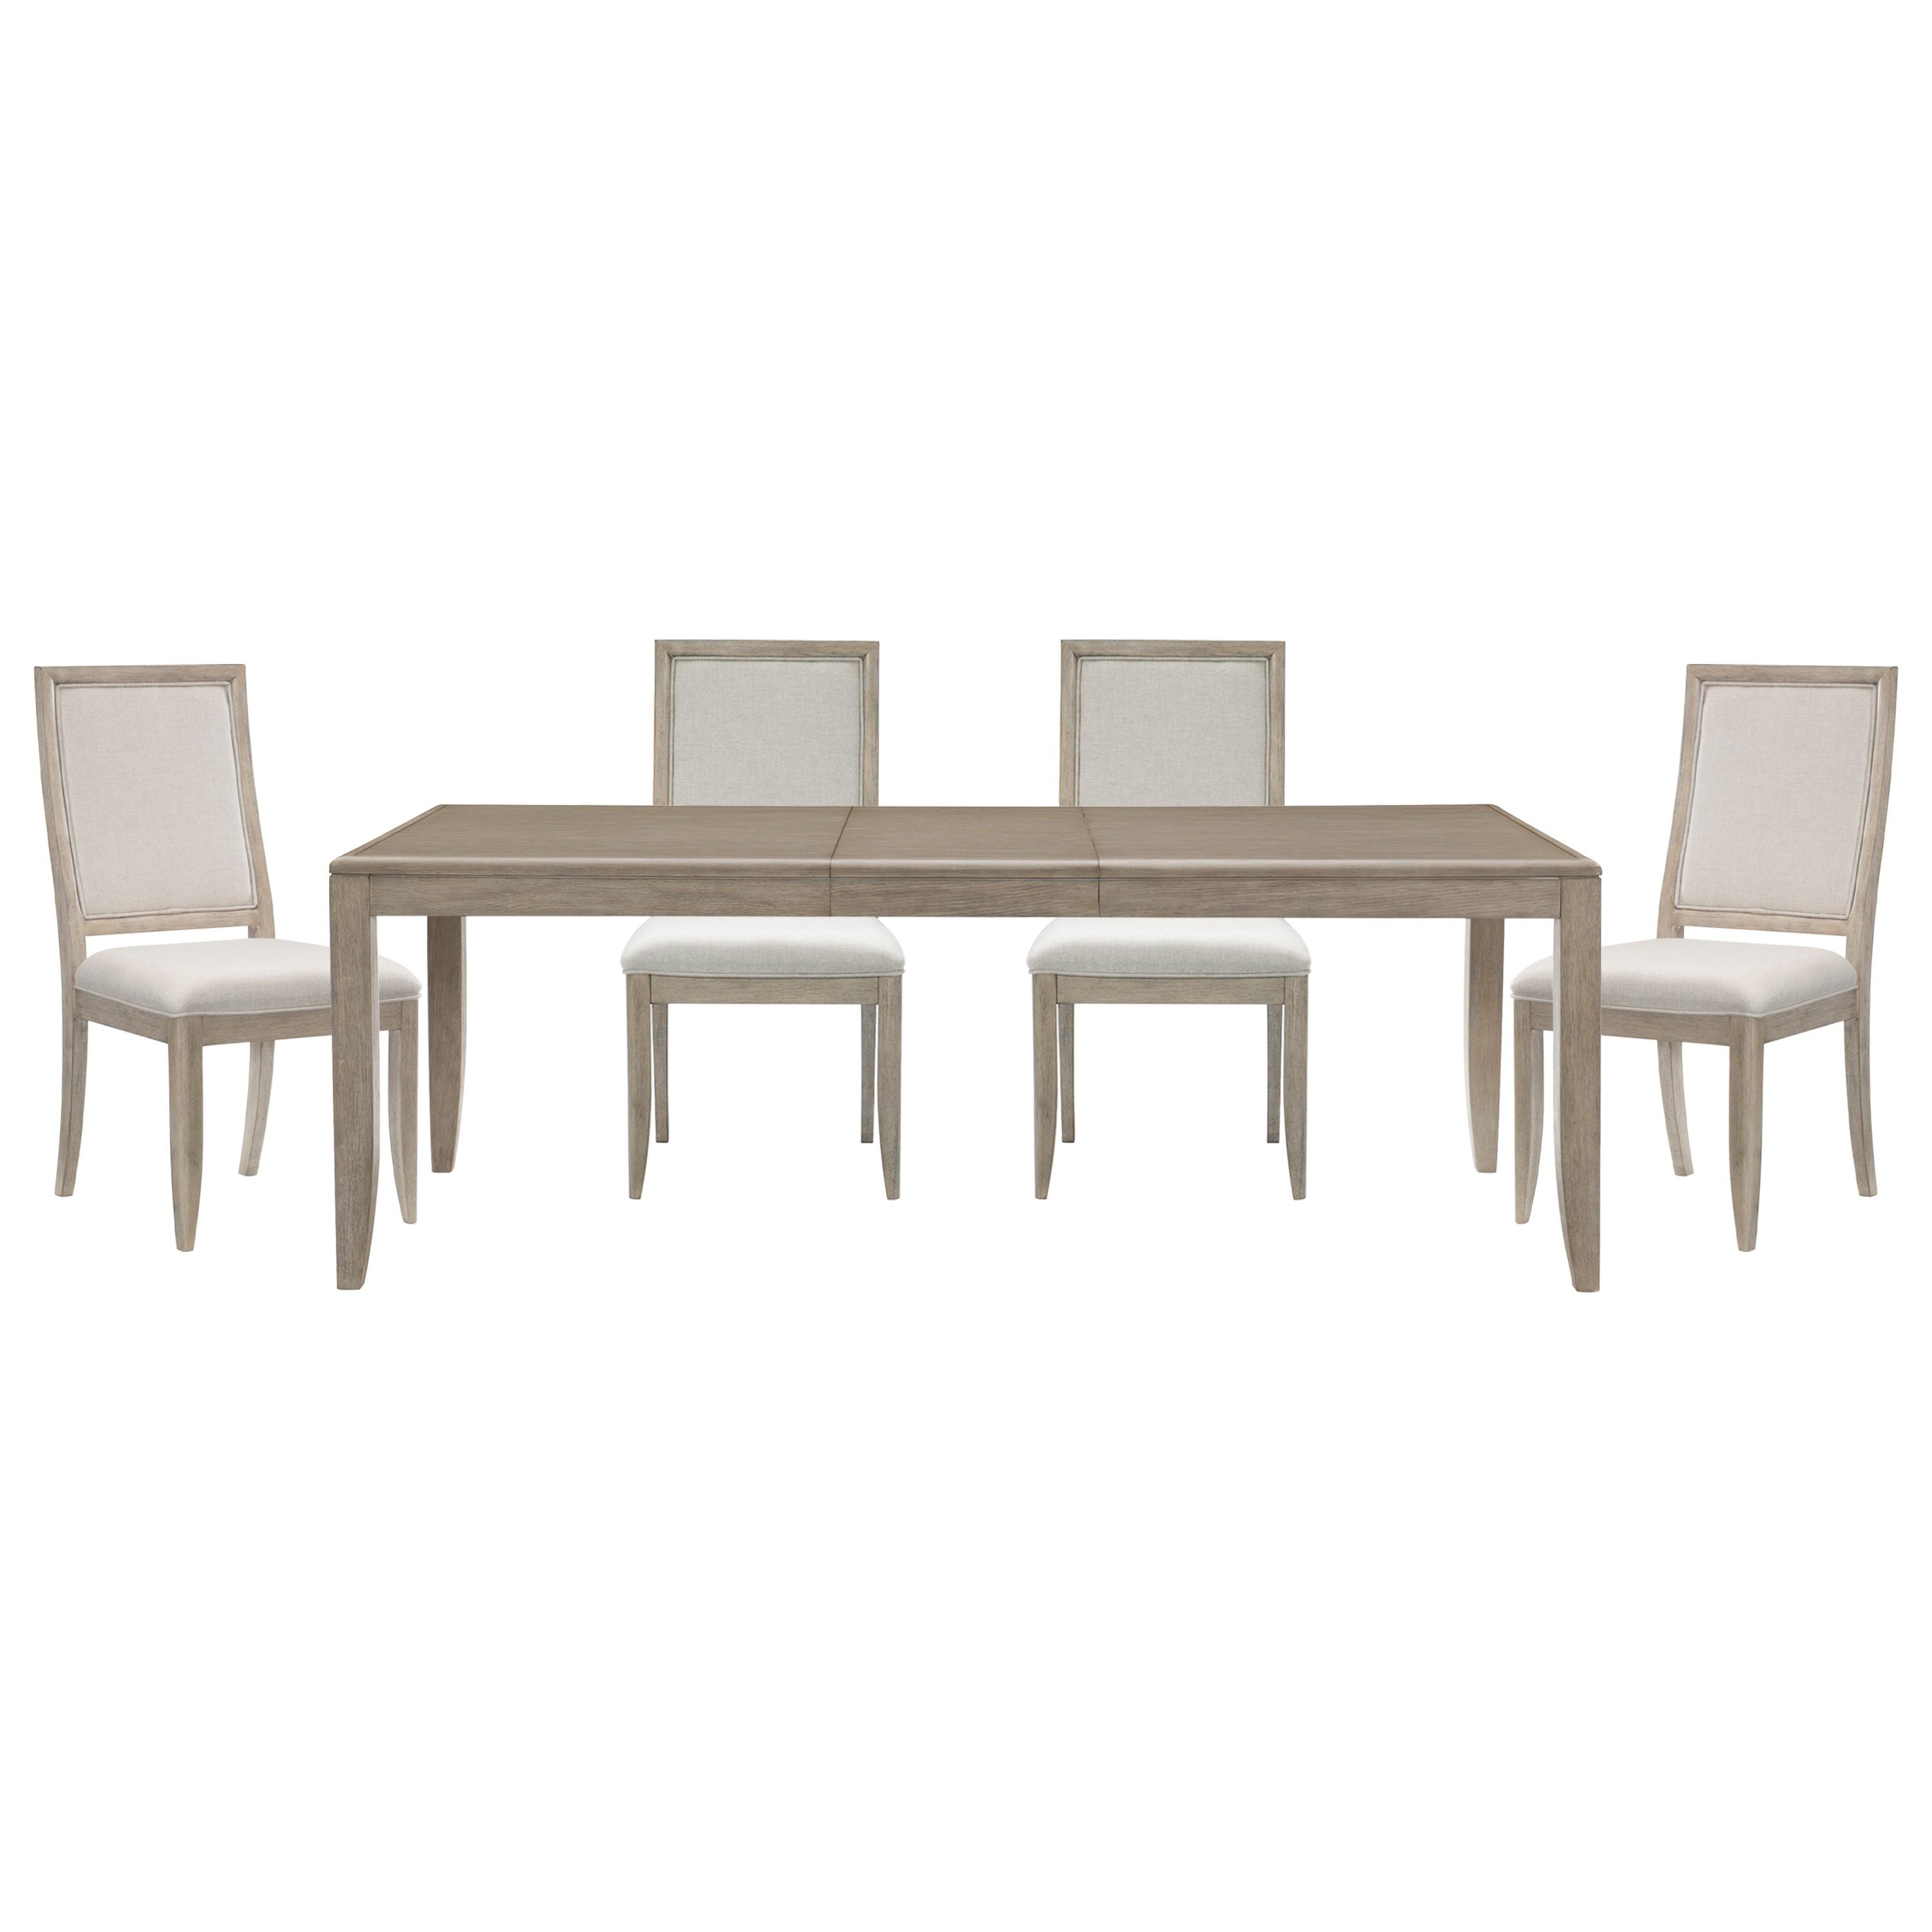 Modern Dining Room Set 1820-86*5PC McKewen 1820-86*5PC in Gray Polyester